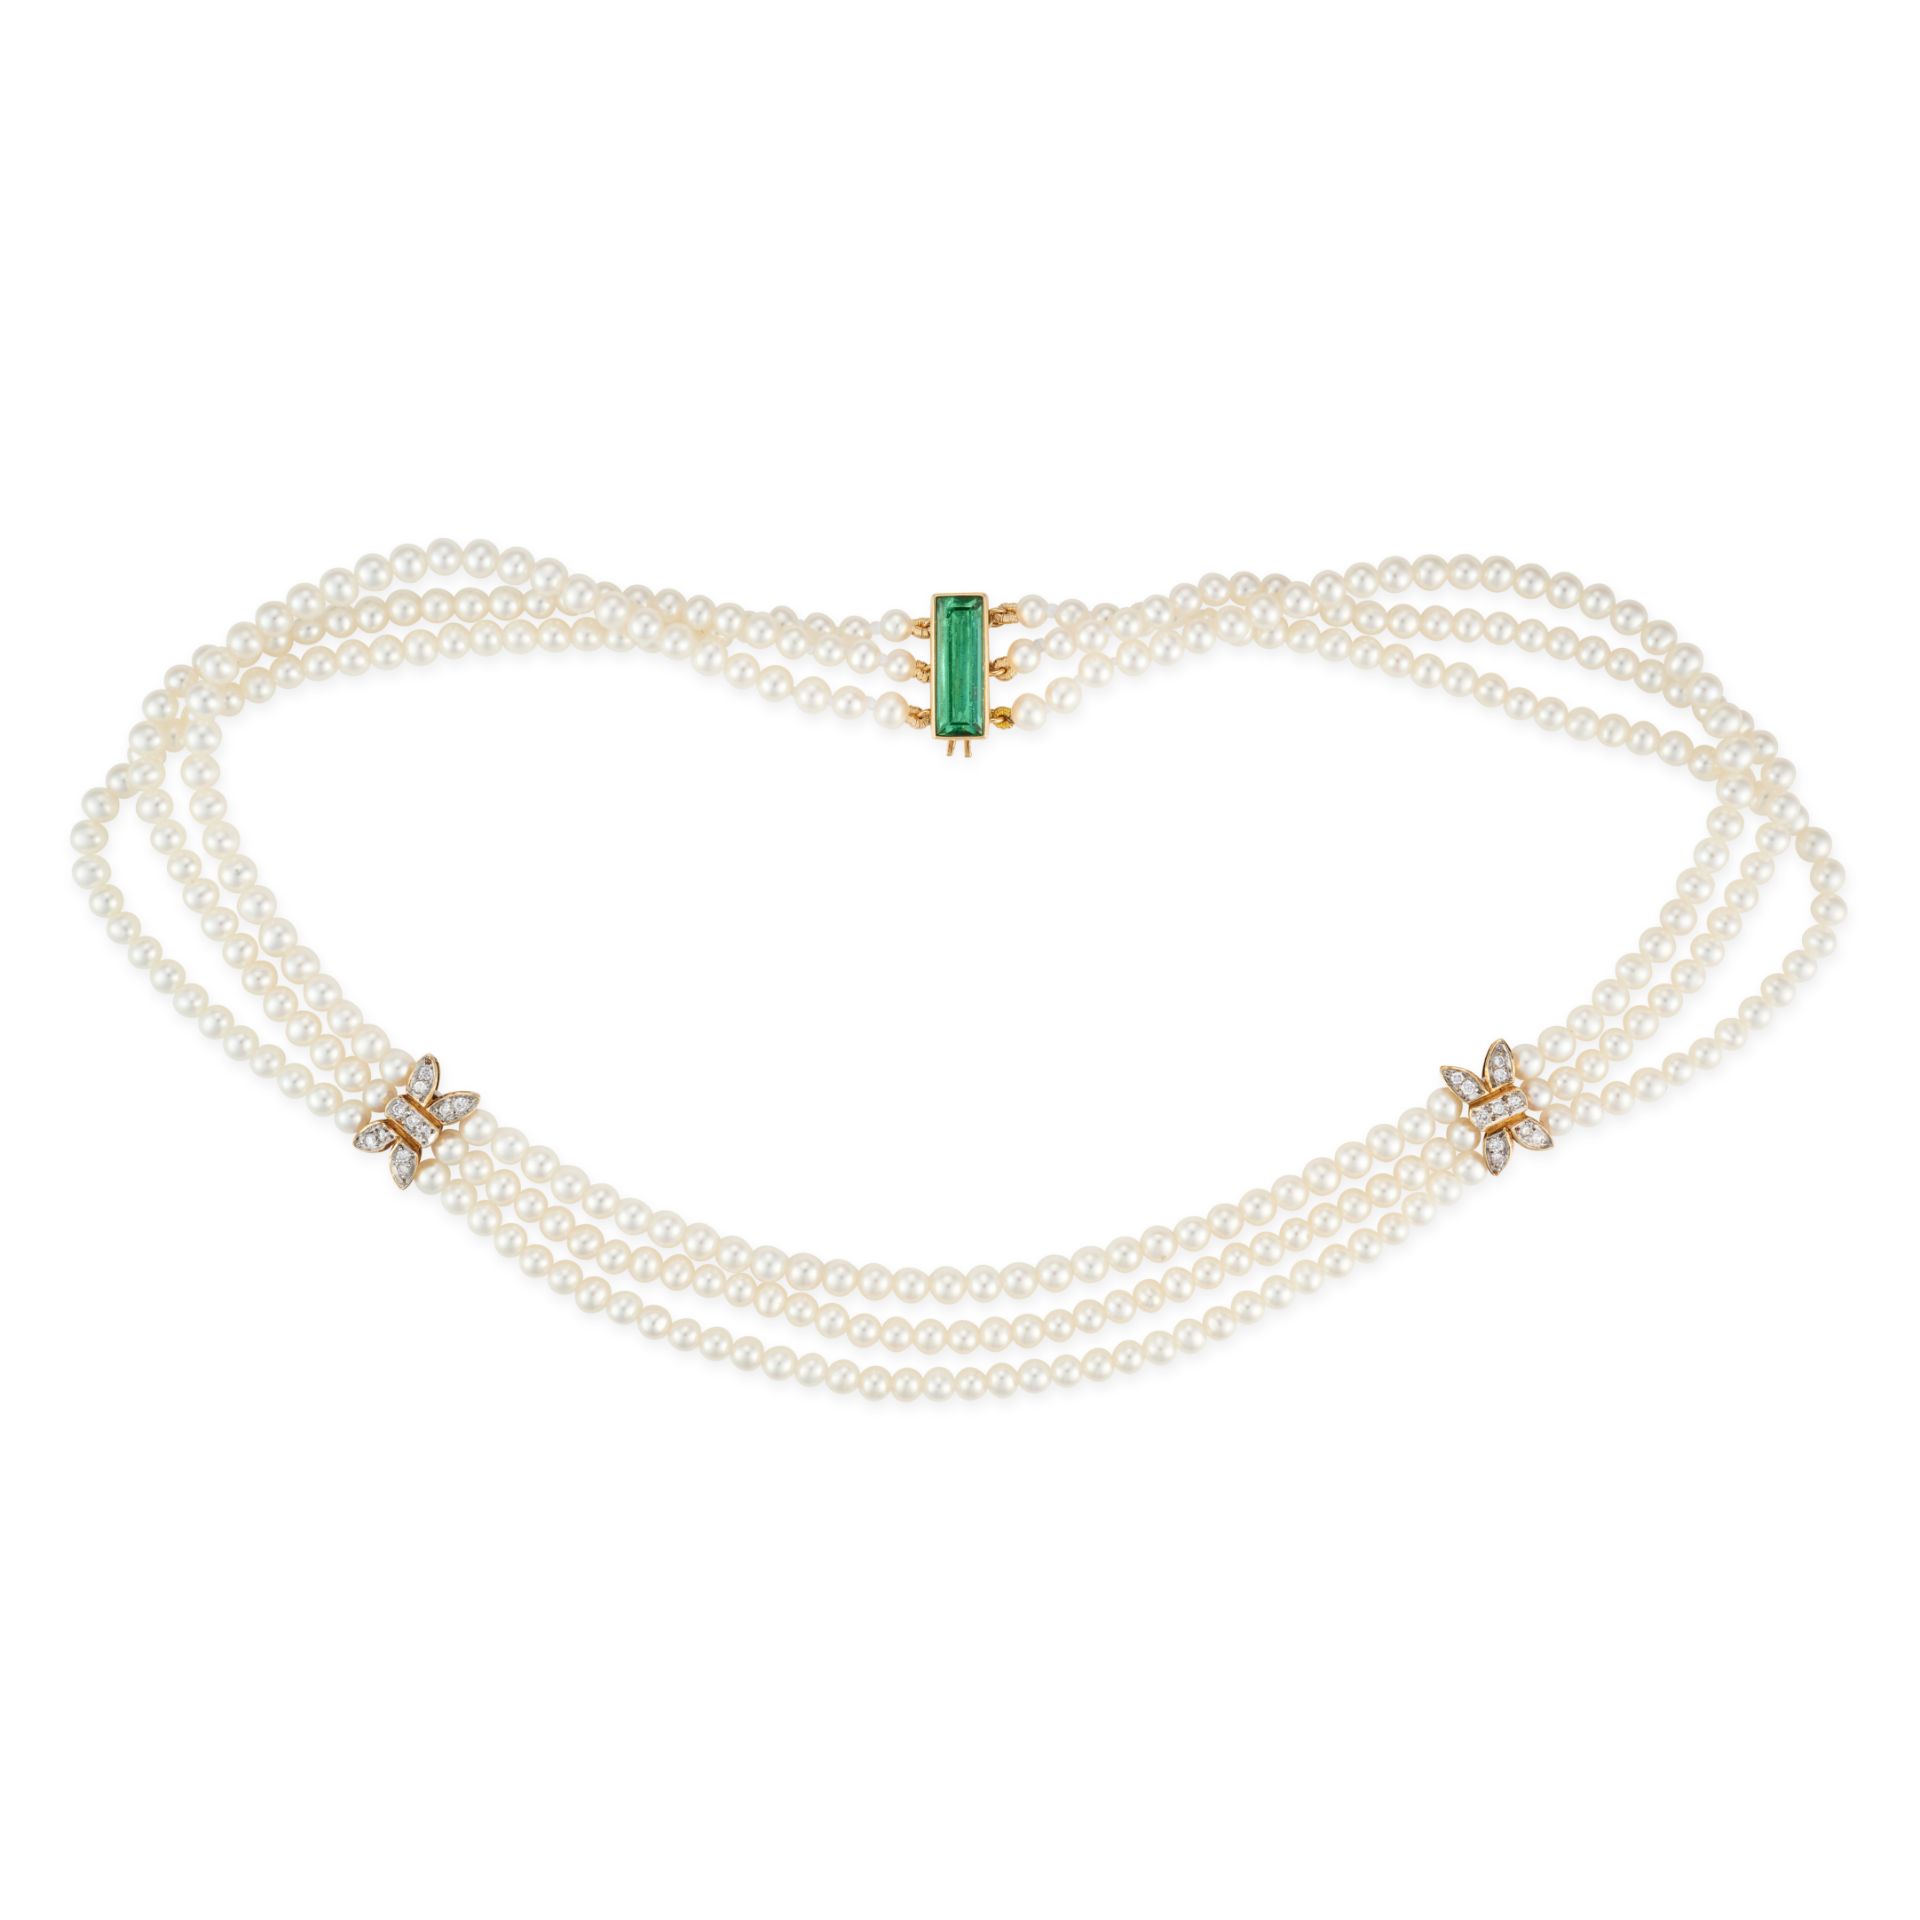 A PEARL, GREEN TOURMALINE AND DIAMOND NECKLACE comprising three rows of pearls accented by two fo...